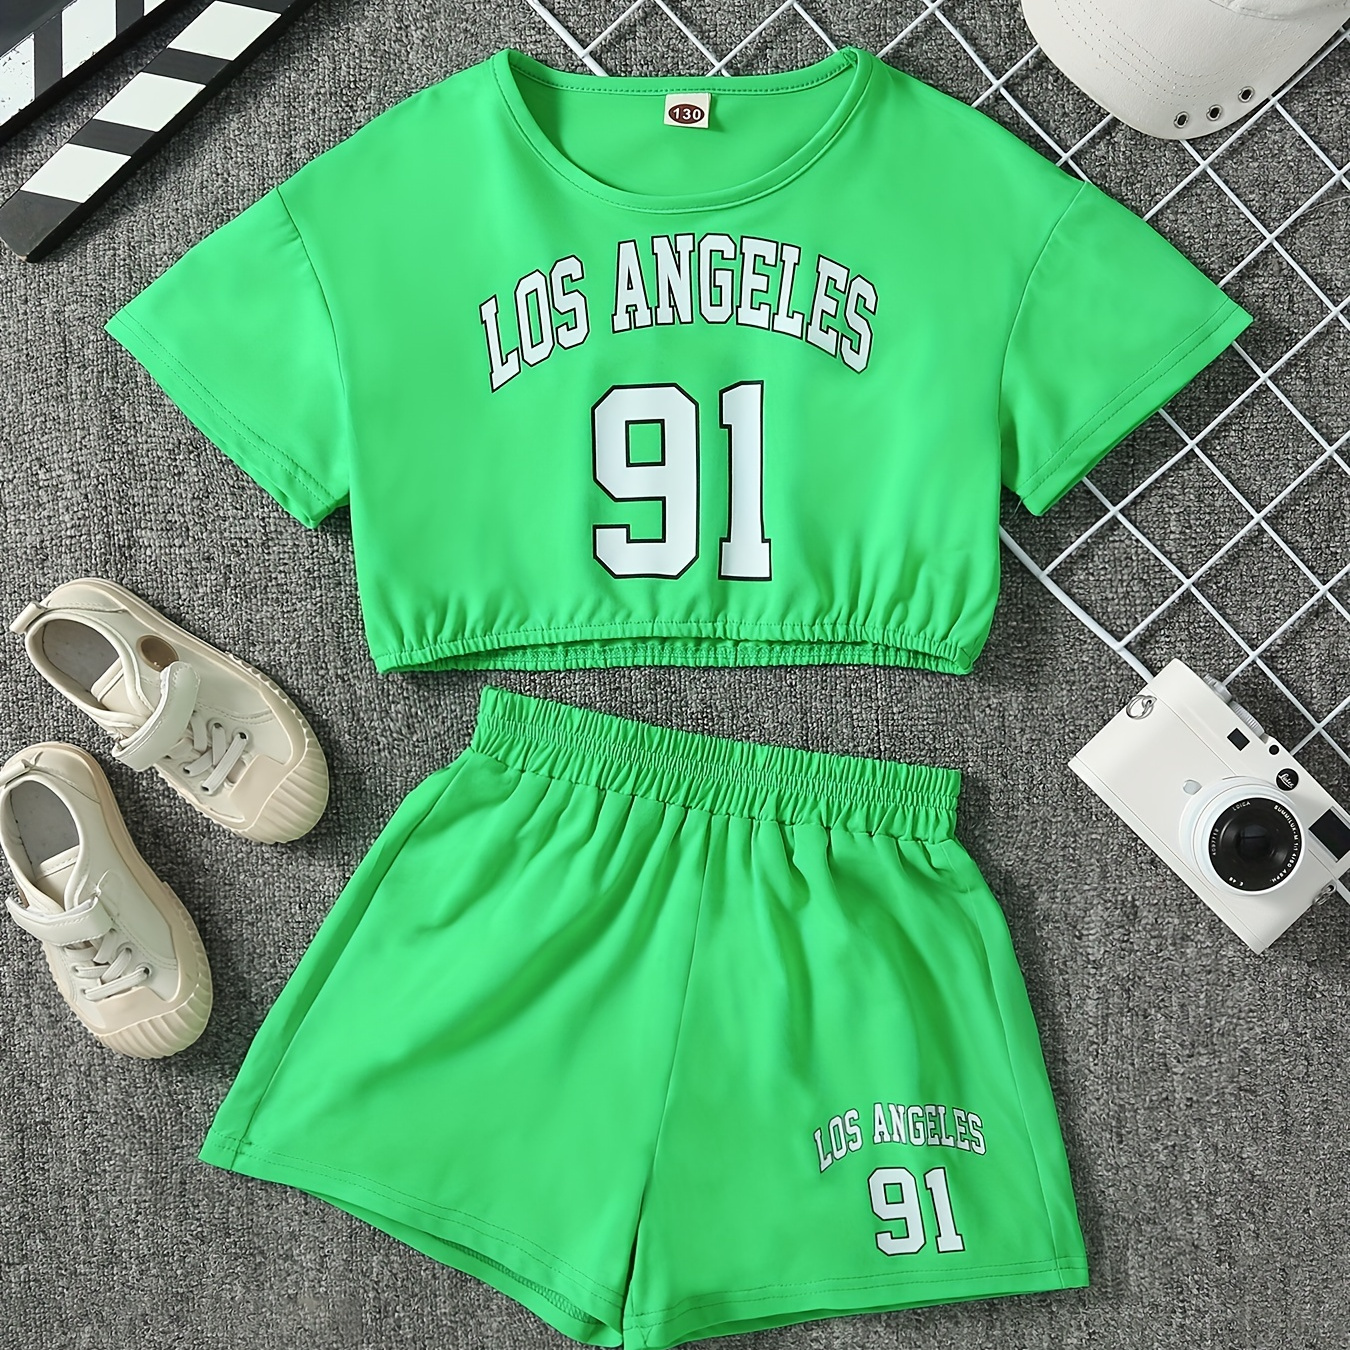 

Girl's Casual Sportswear Fluorescent Green Letter Printed Suit Round Neck Short Sleeve Top + Shorts Summer Elastic Suit